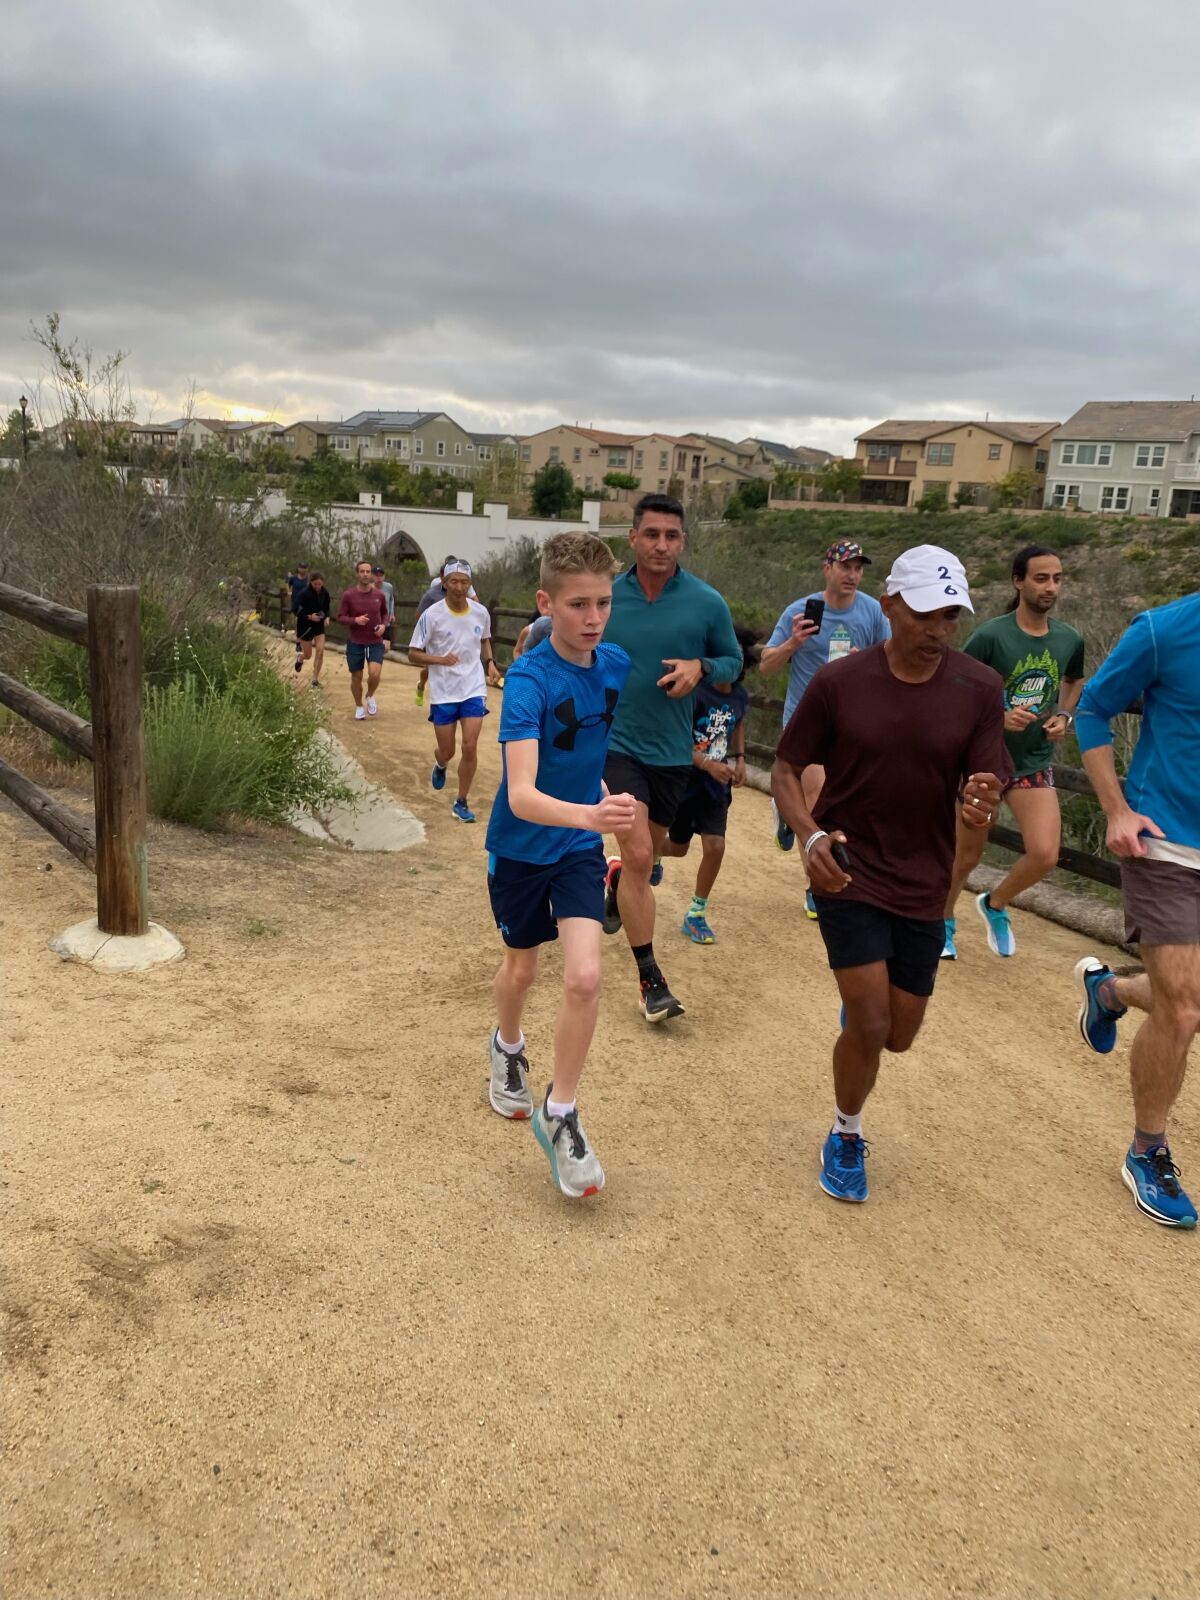 Meb Keflezighi runs with the group on the trail through Pacific Highlands Ranch.